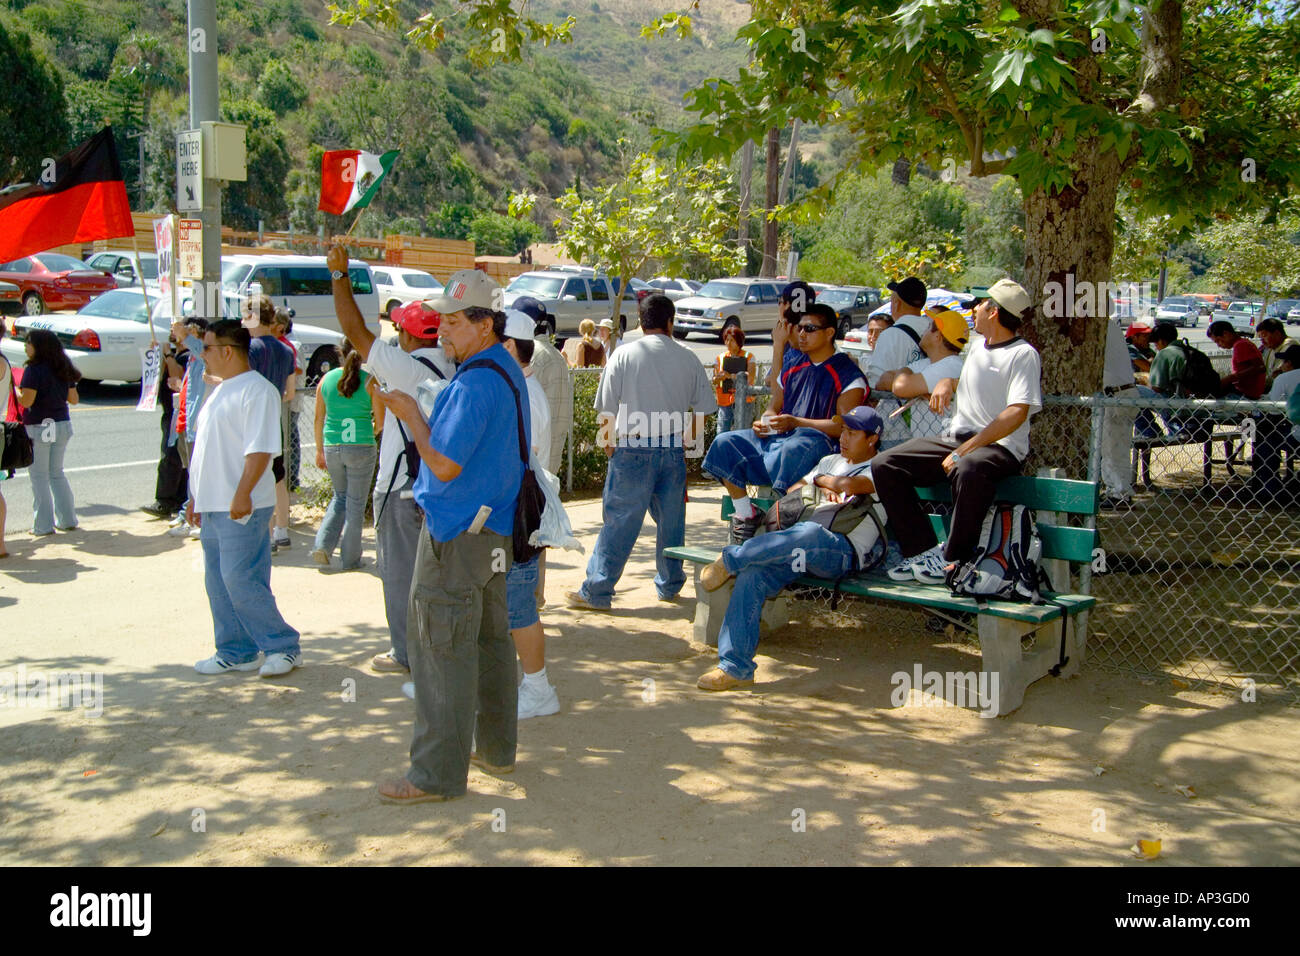 Hispanic day laborers watch a rally in their favor at a day laborer hiring center in Laguna Beach, CA. Stock Photo